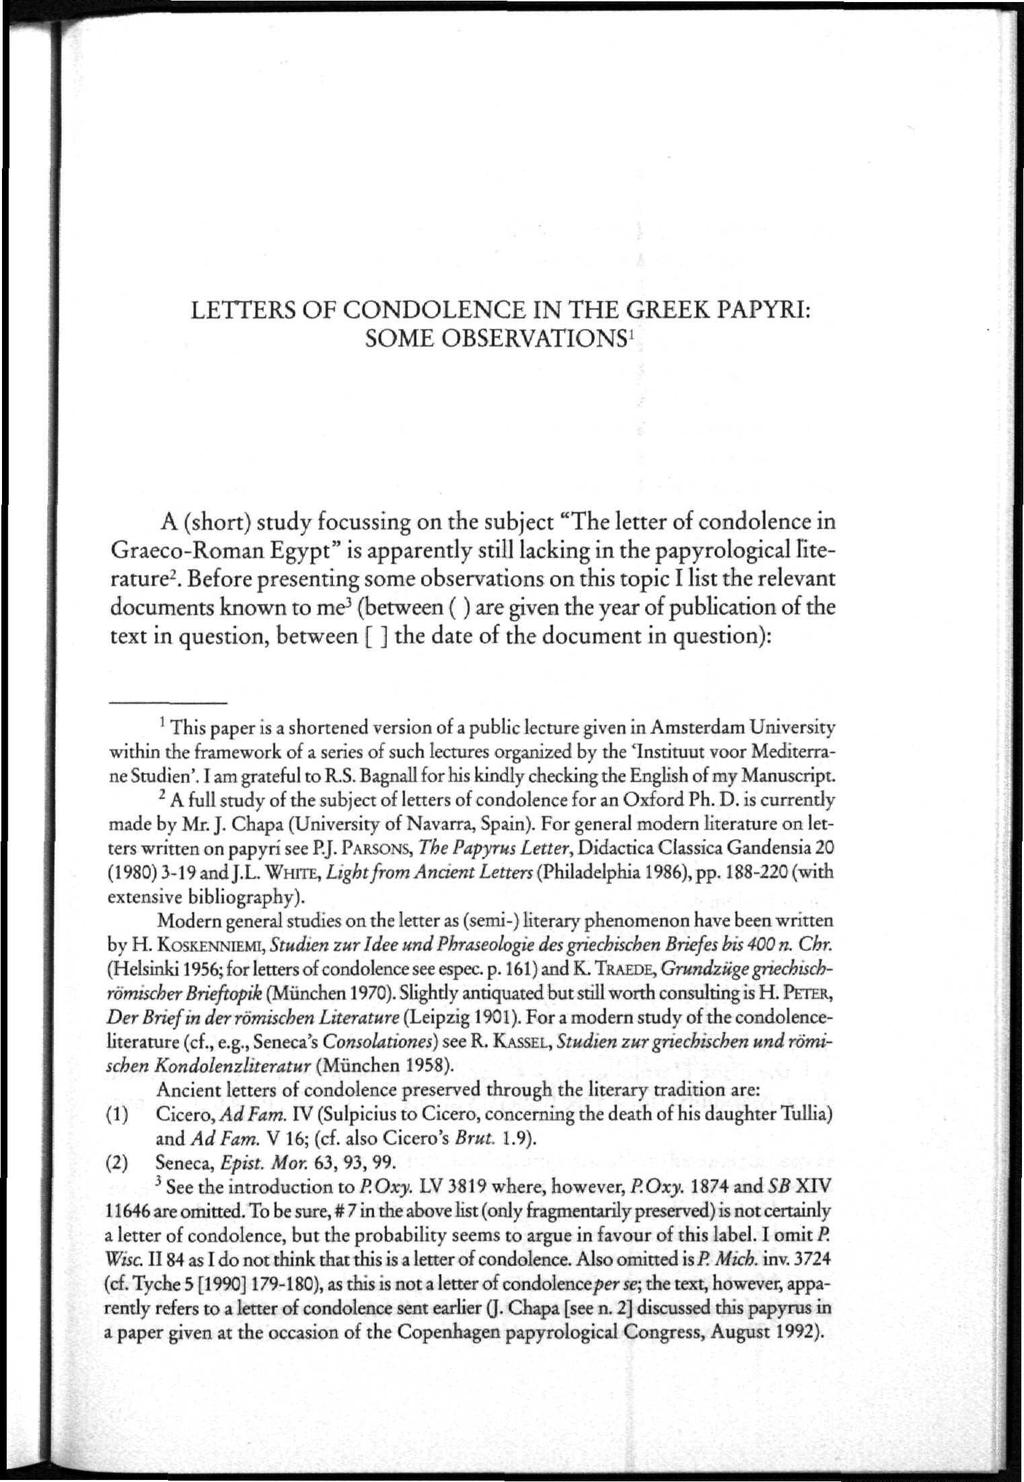 LETTERS OF CONDOLENCE IN THE GREEK PAPYRI: SOME OBSERVATIONS 1 A (short) study focussing on the subject "The letter of condolence in Graeco-Roman Egypt" is apparently still lacking in the